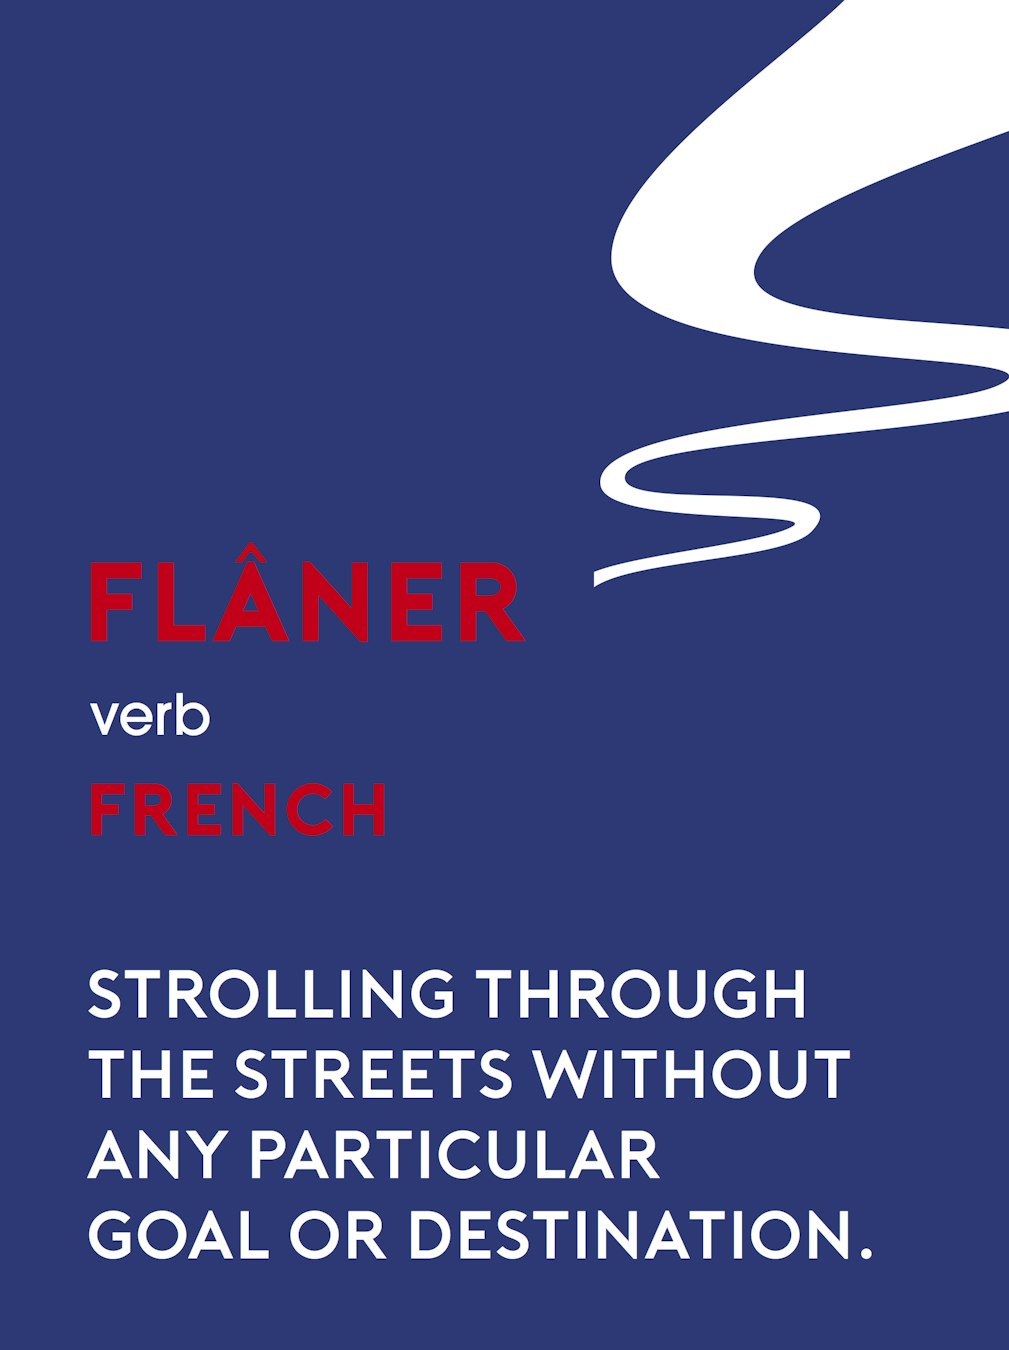 French-Flaner2